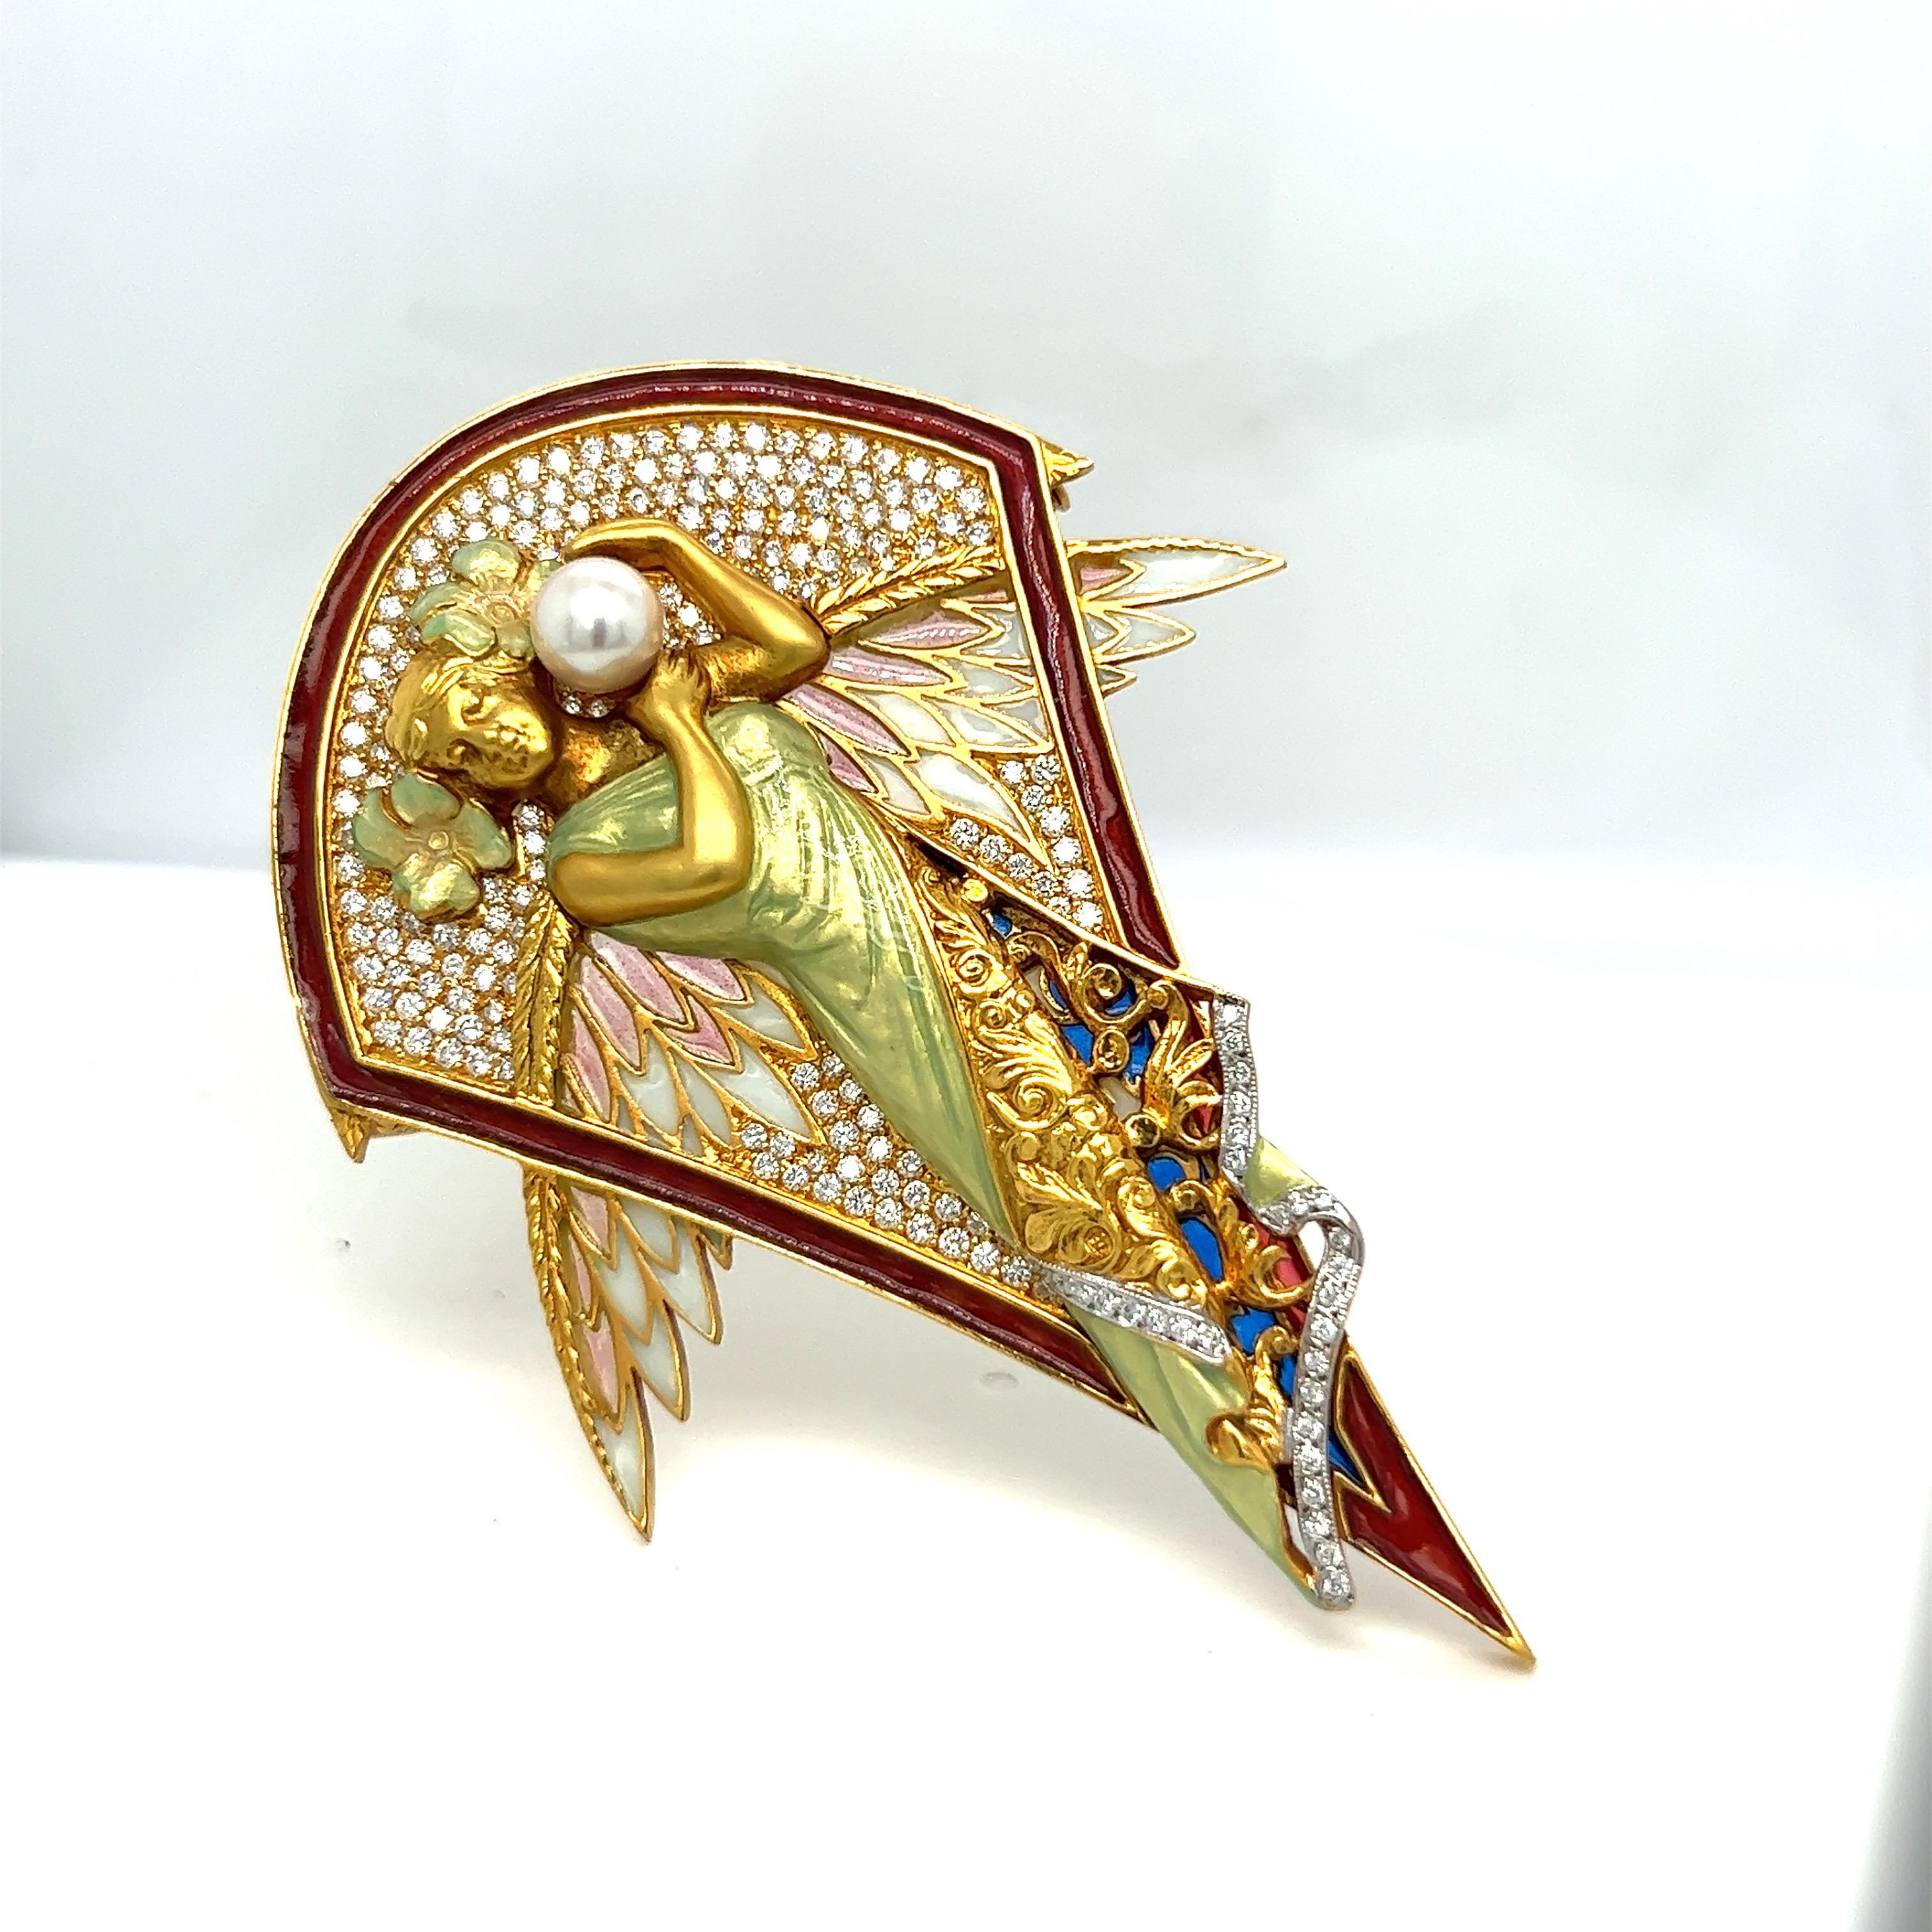 Masriera 18 KT YG Winged Nymph Brooch with Dia 1.94CT, Enamel and Pearls For Sale 4